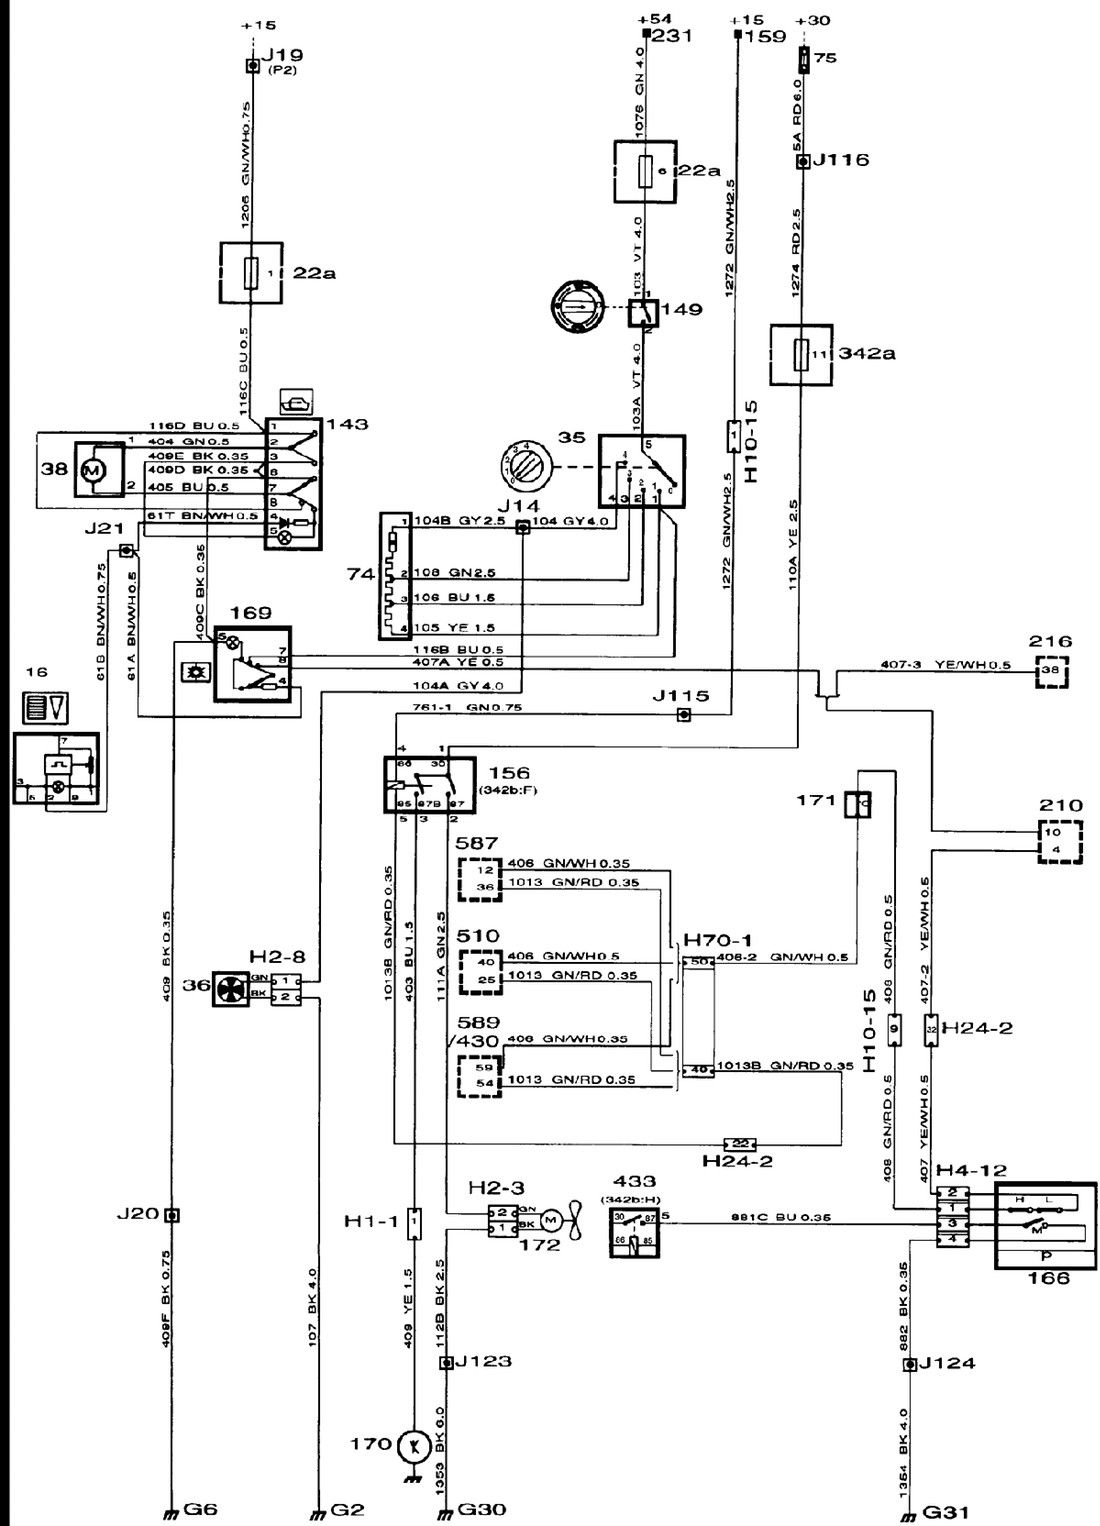 Diagram size Wiring Diagram For Acc Here You Go i wire electrical